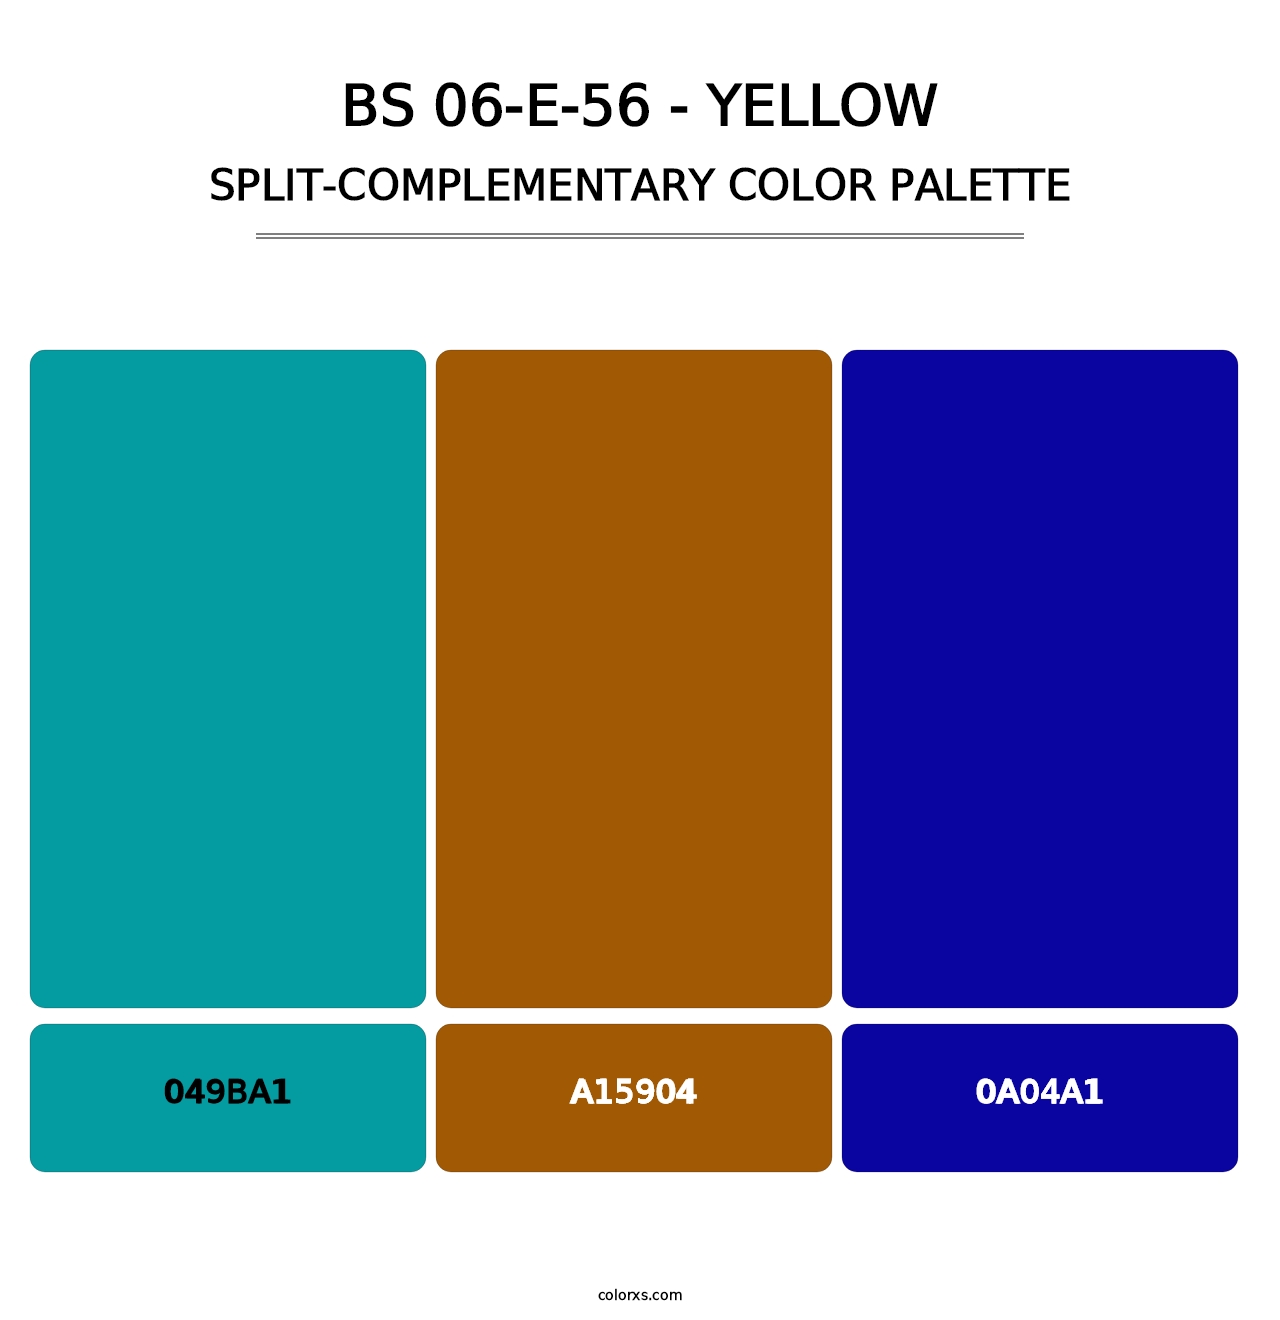 BS 06-E-56 - Yellow - Split-Complementary Color Palette